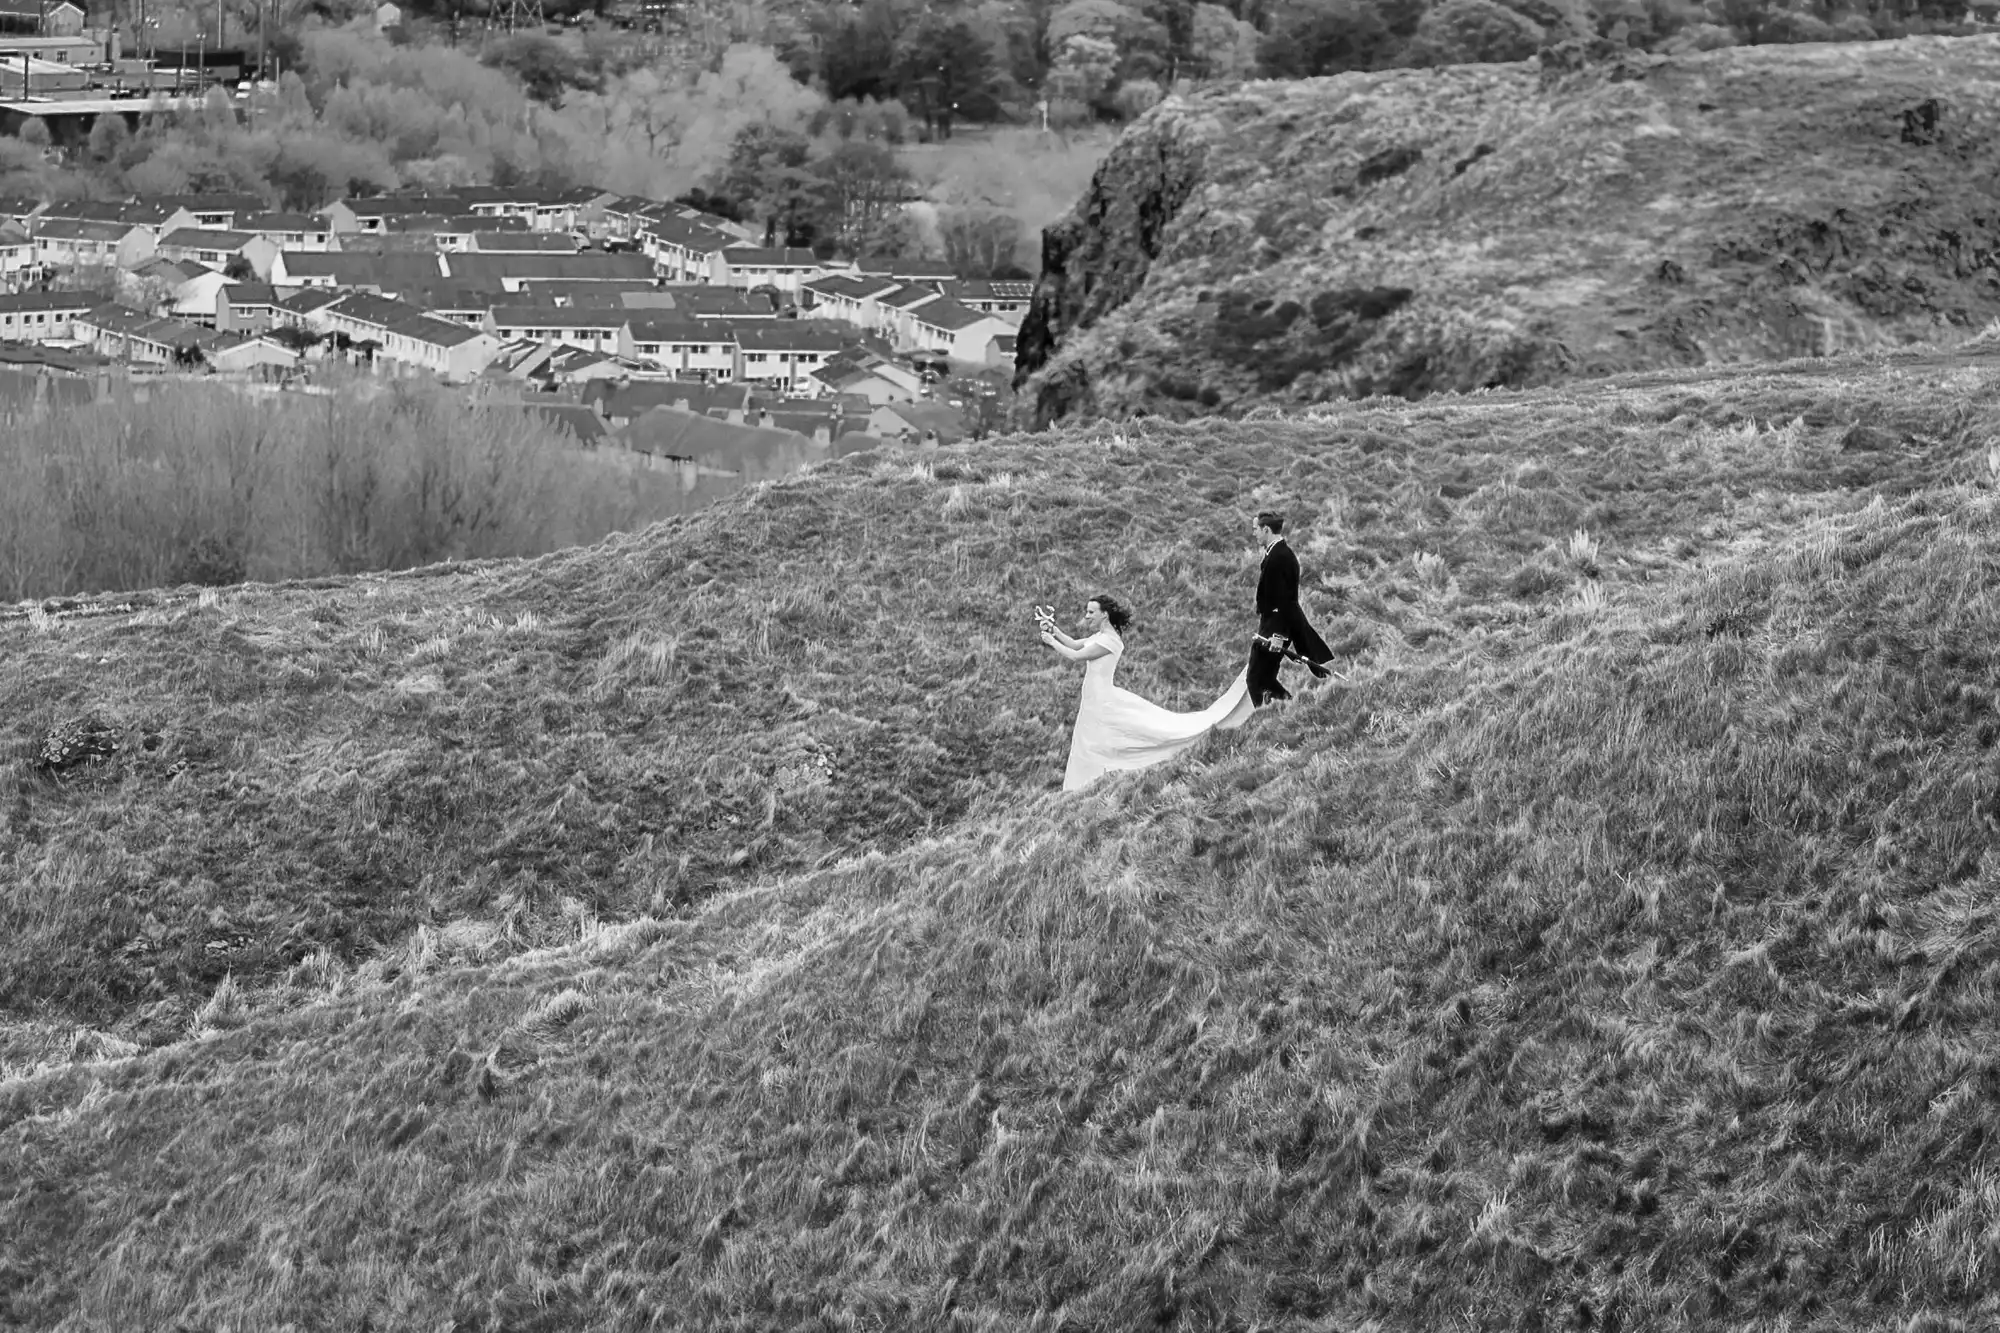 A bride and groom walking up a grassy hill, with the bride's long white dress trailing behind, against a backdrop of a small town.